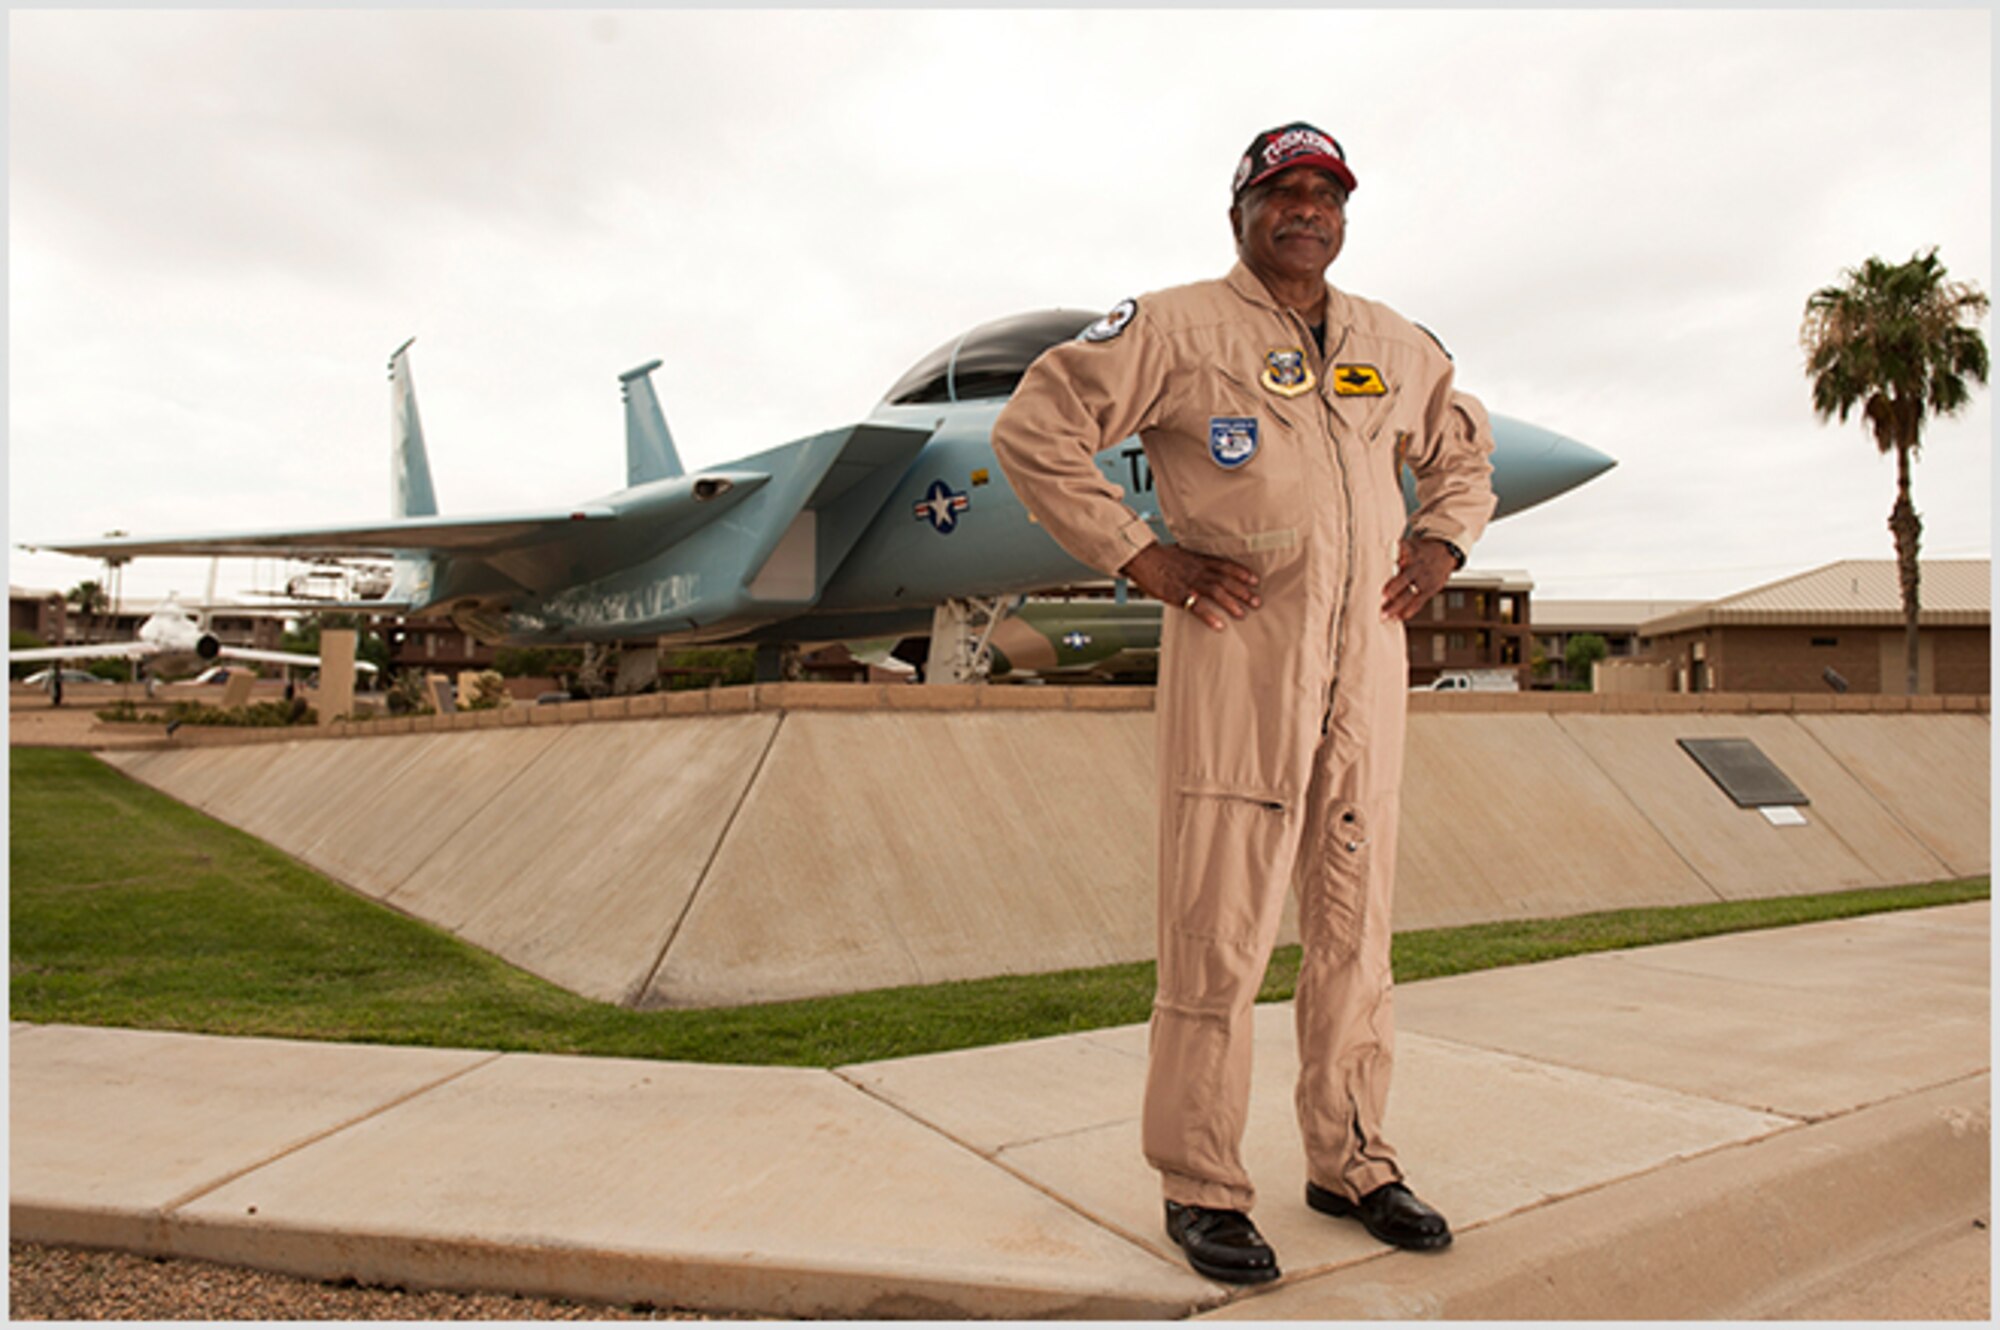 Retired Col. Richard Toliver graduated from Tuskegee Institute University in January 1963 with a Bachelor of Science degree in mechanical engineering. He was one of the first five African American F-4 Phantom II pilots to serve under the famed Tuskegee Airman Gen. Daniel Chappie James. (Courtesy photo)